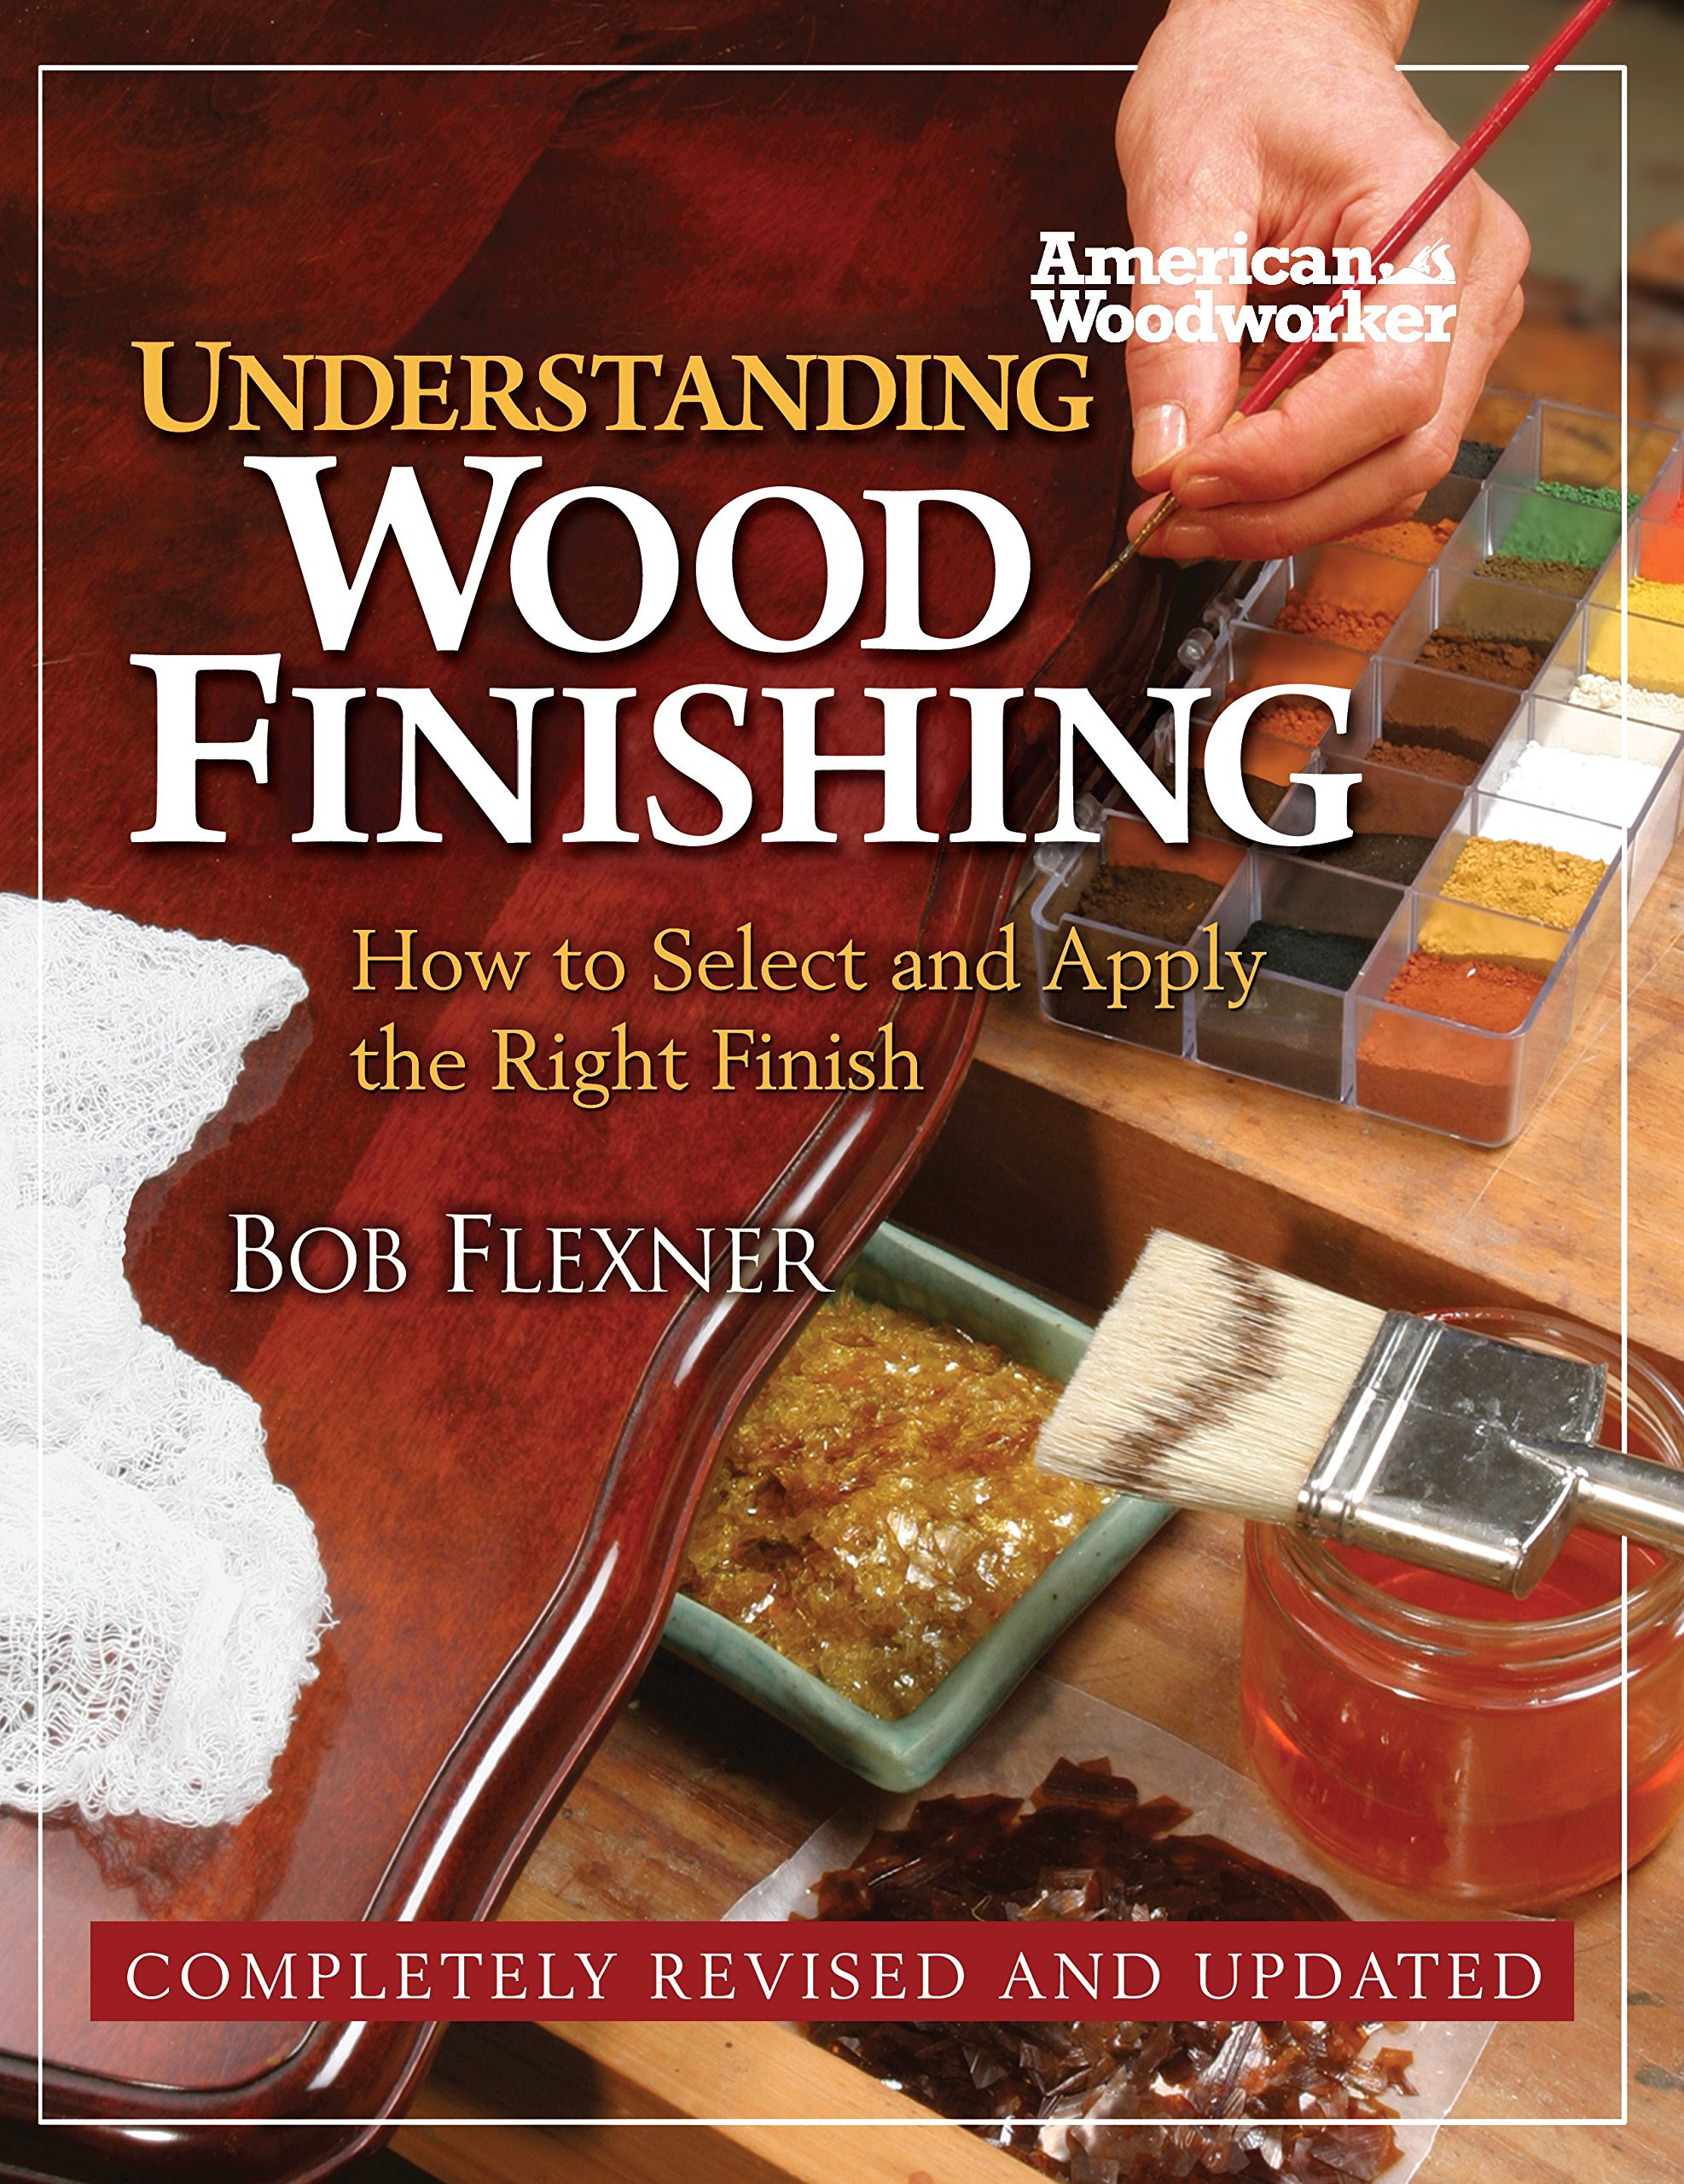 30 attractive Hardwood Floor Maintenance Crossword Clue 2024 free download hardwood floor maintenance crossword clue of understanding wood finishing how to select and apply the right intended for understanding wood finishing how to select and apply the right finish